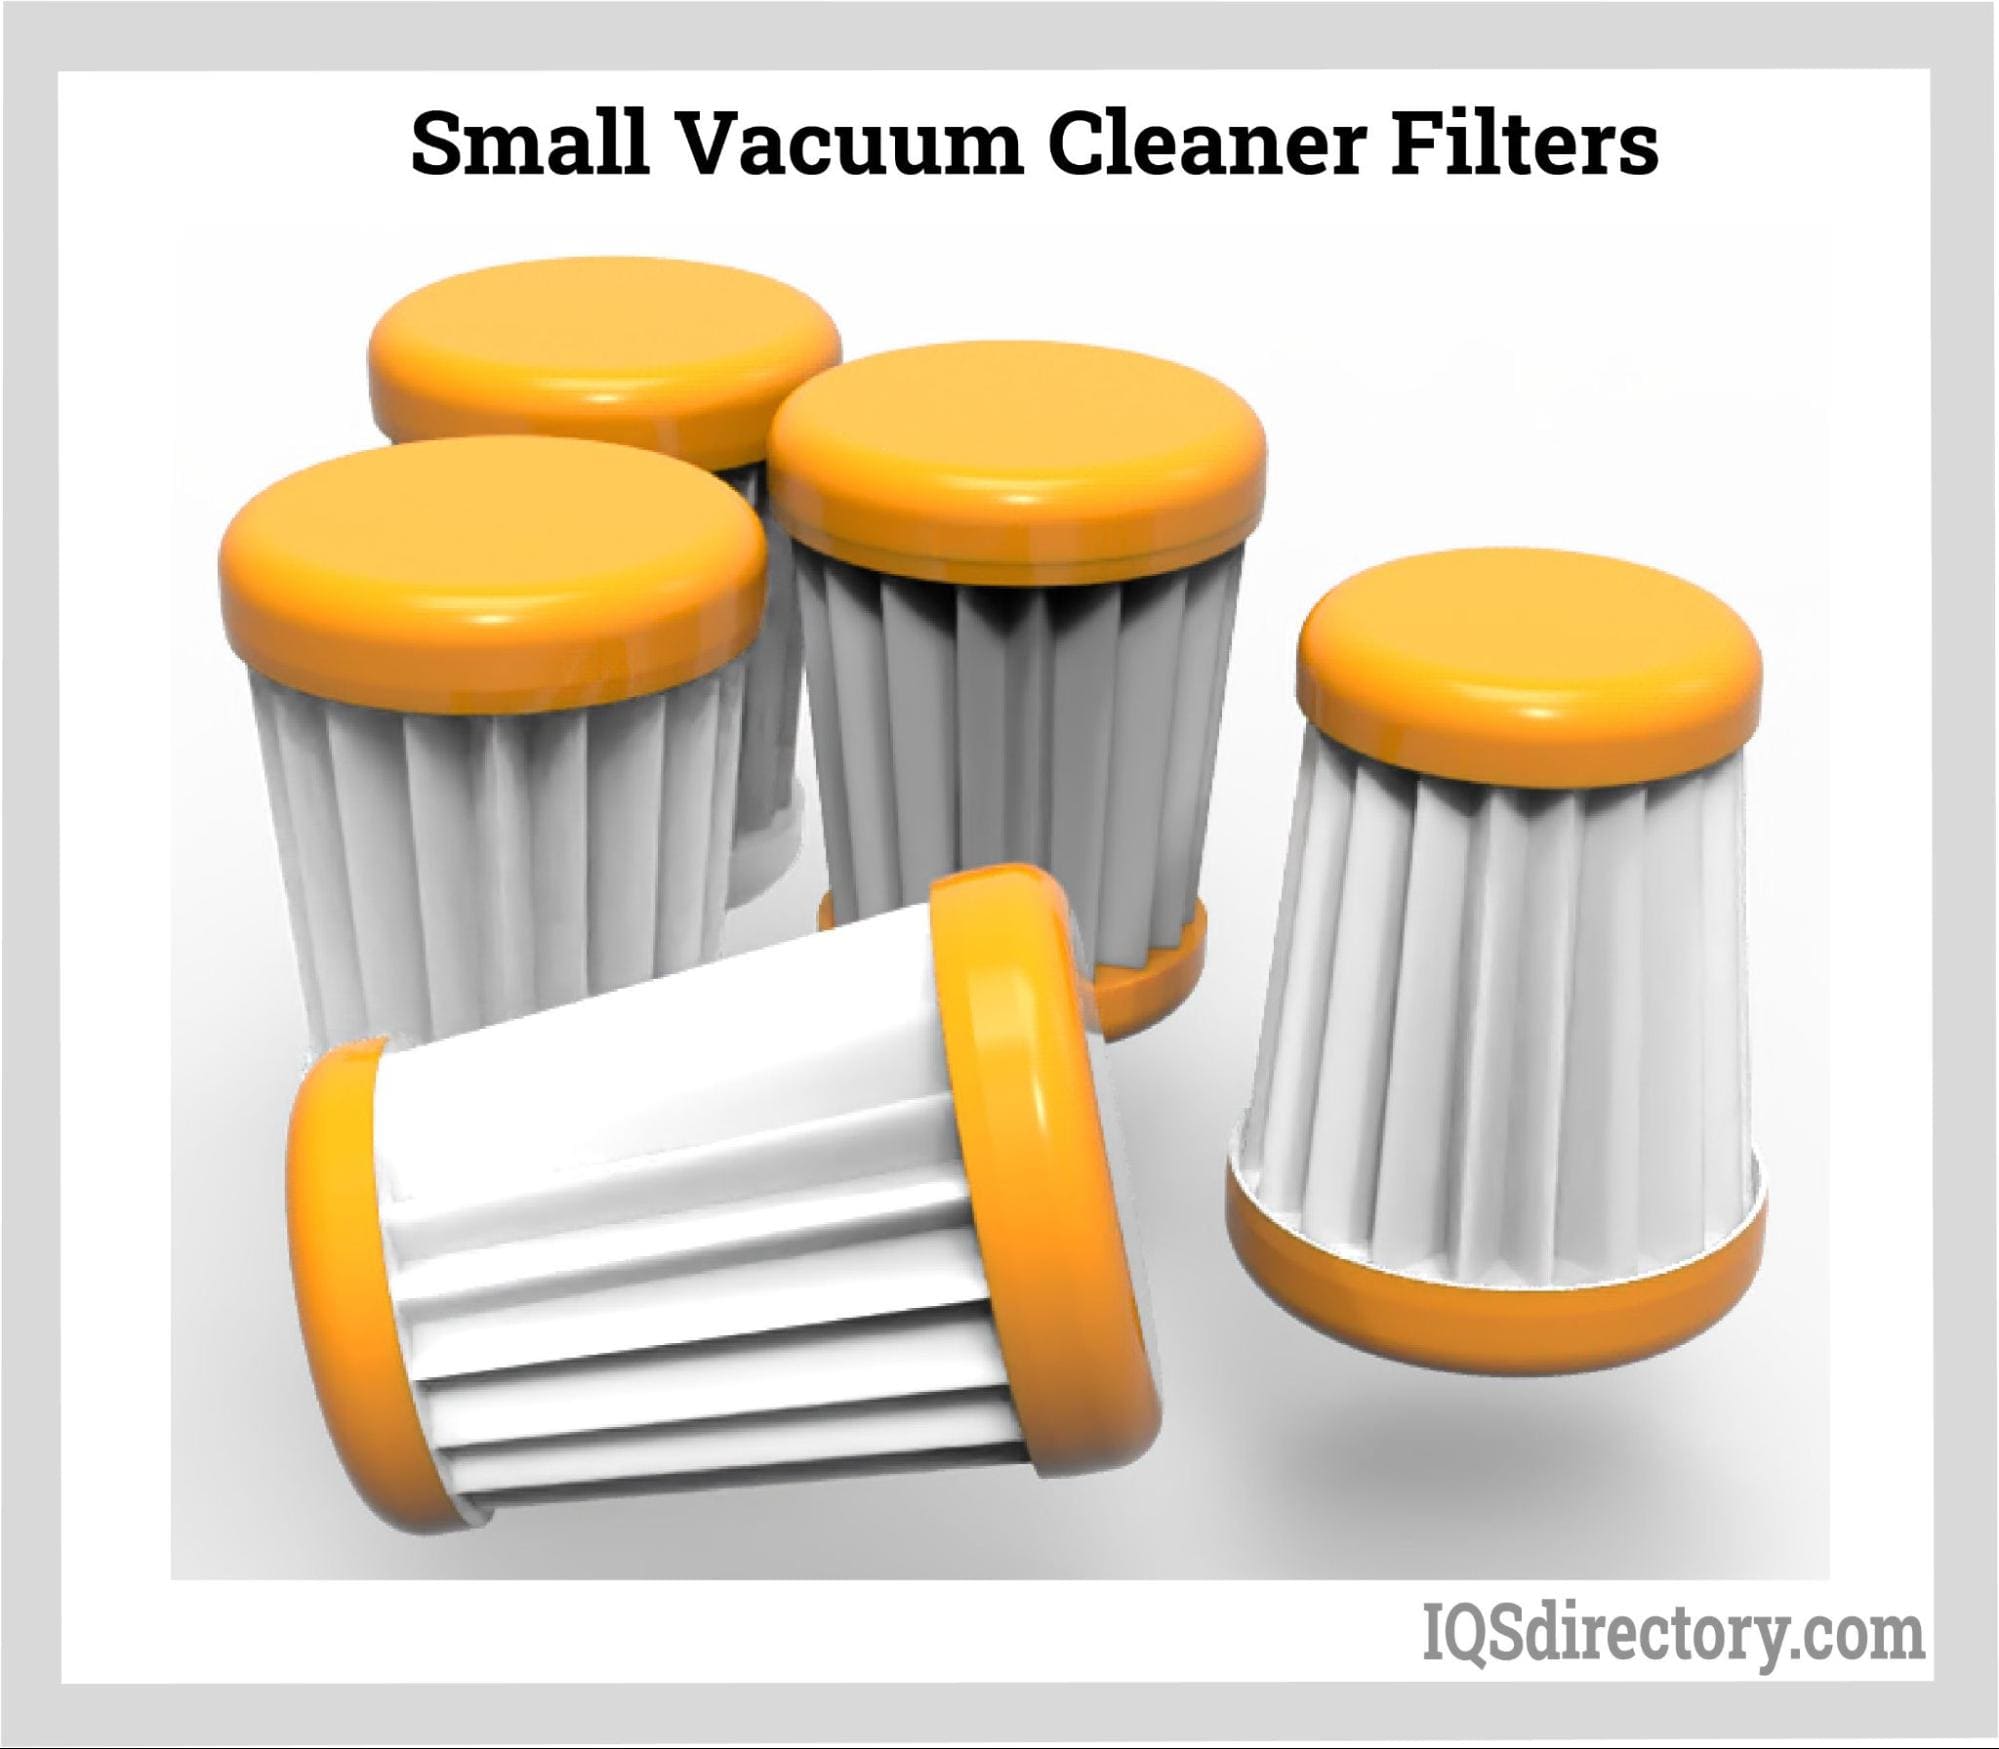 Small Vacuum Cleaner Filters